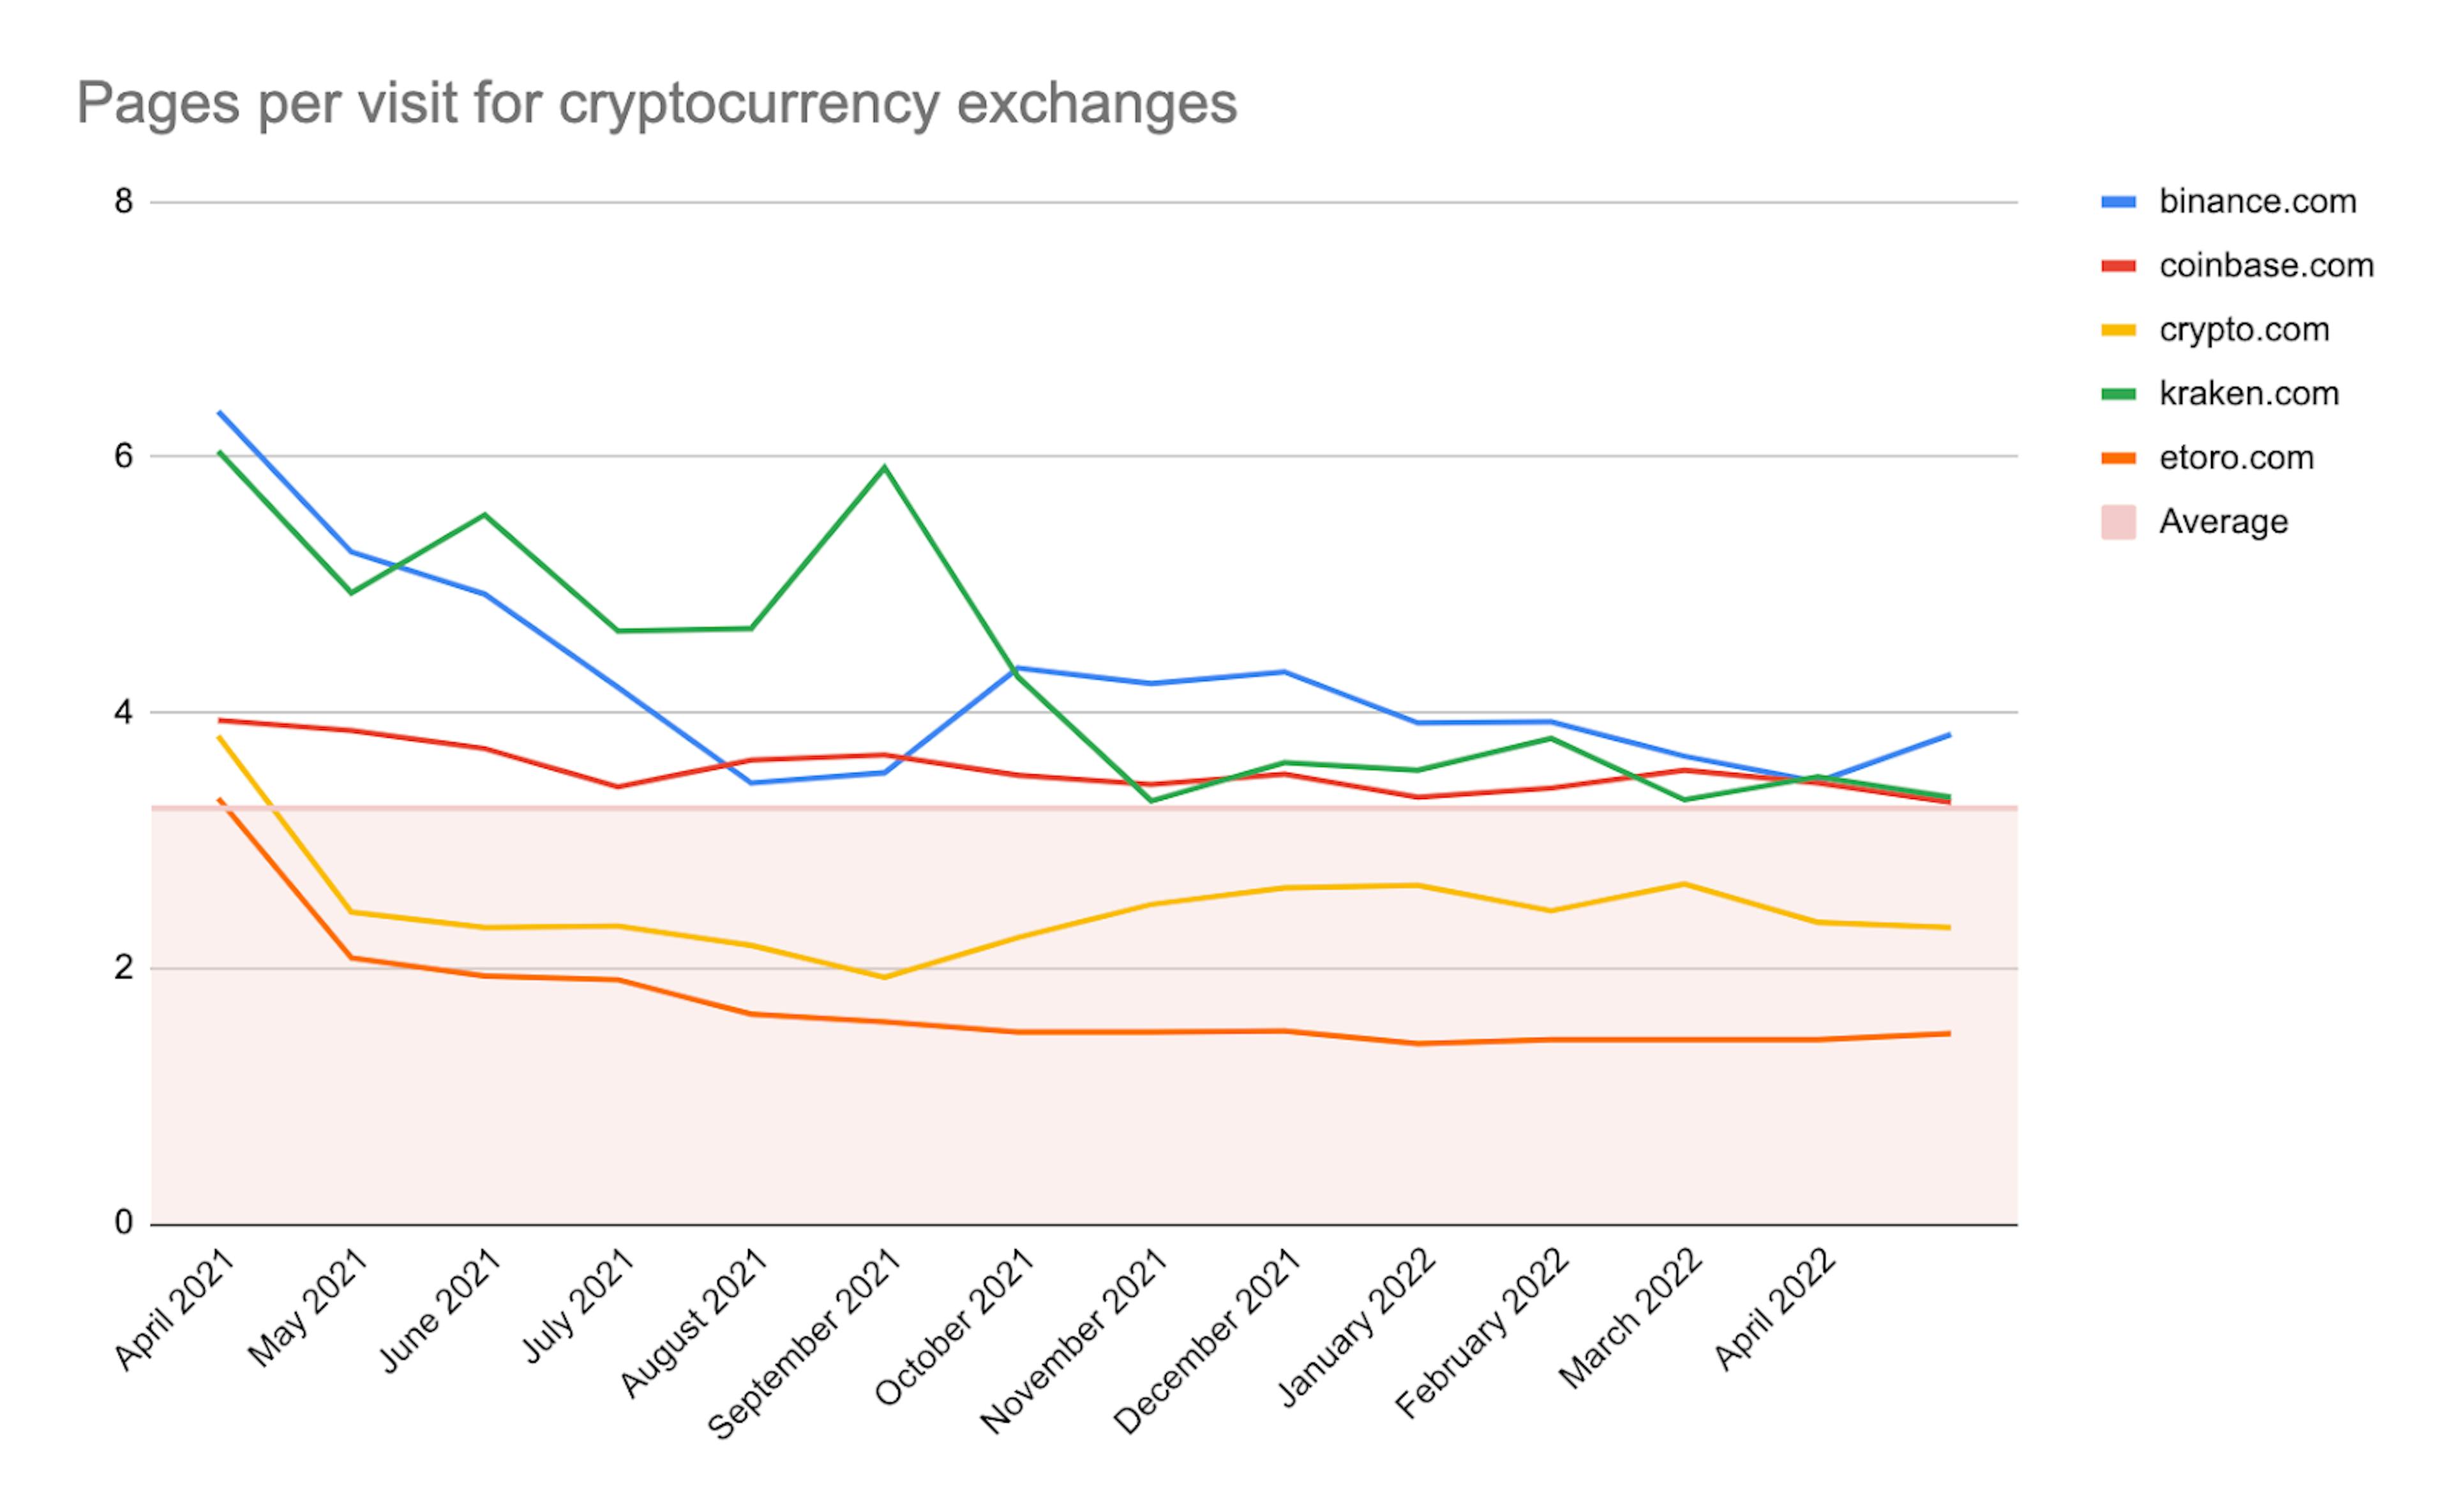 Pages per visit by cryptocurrency exchange